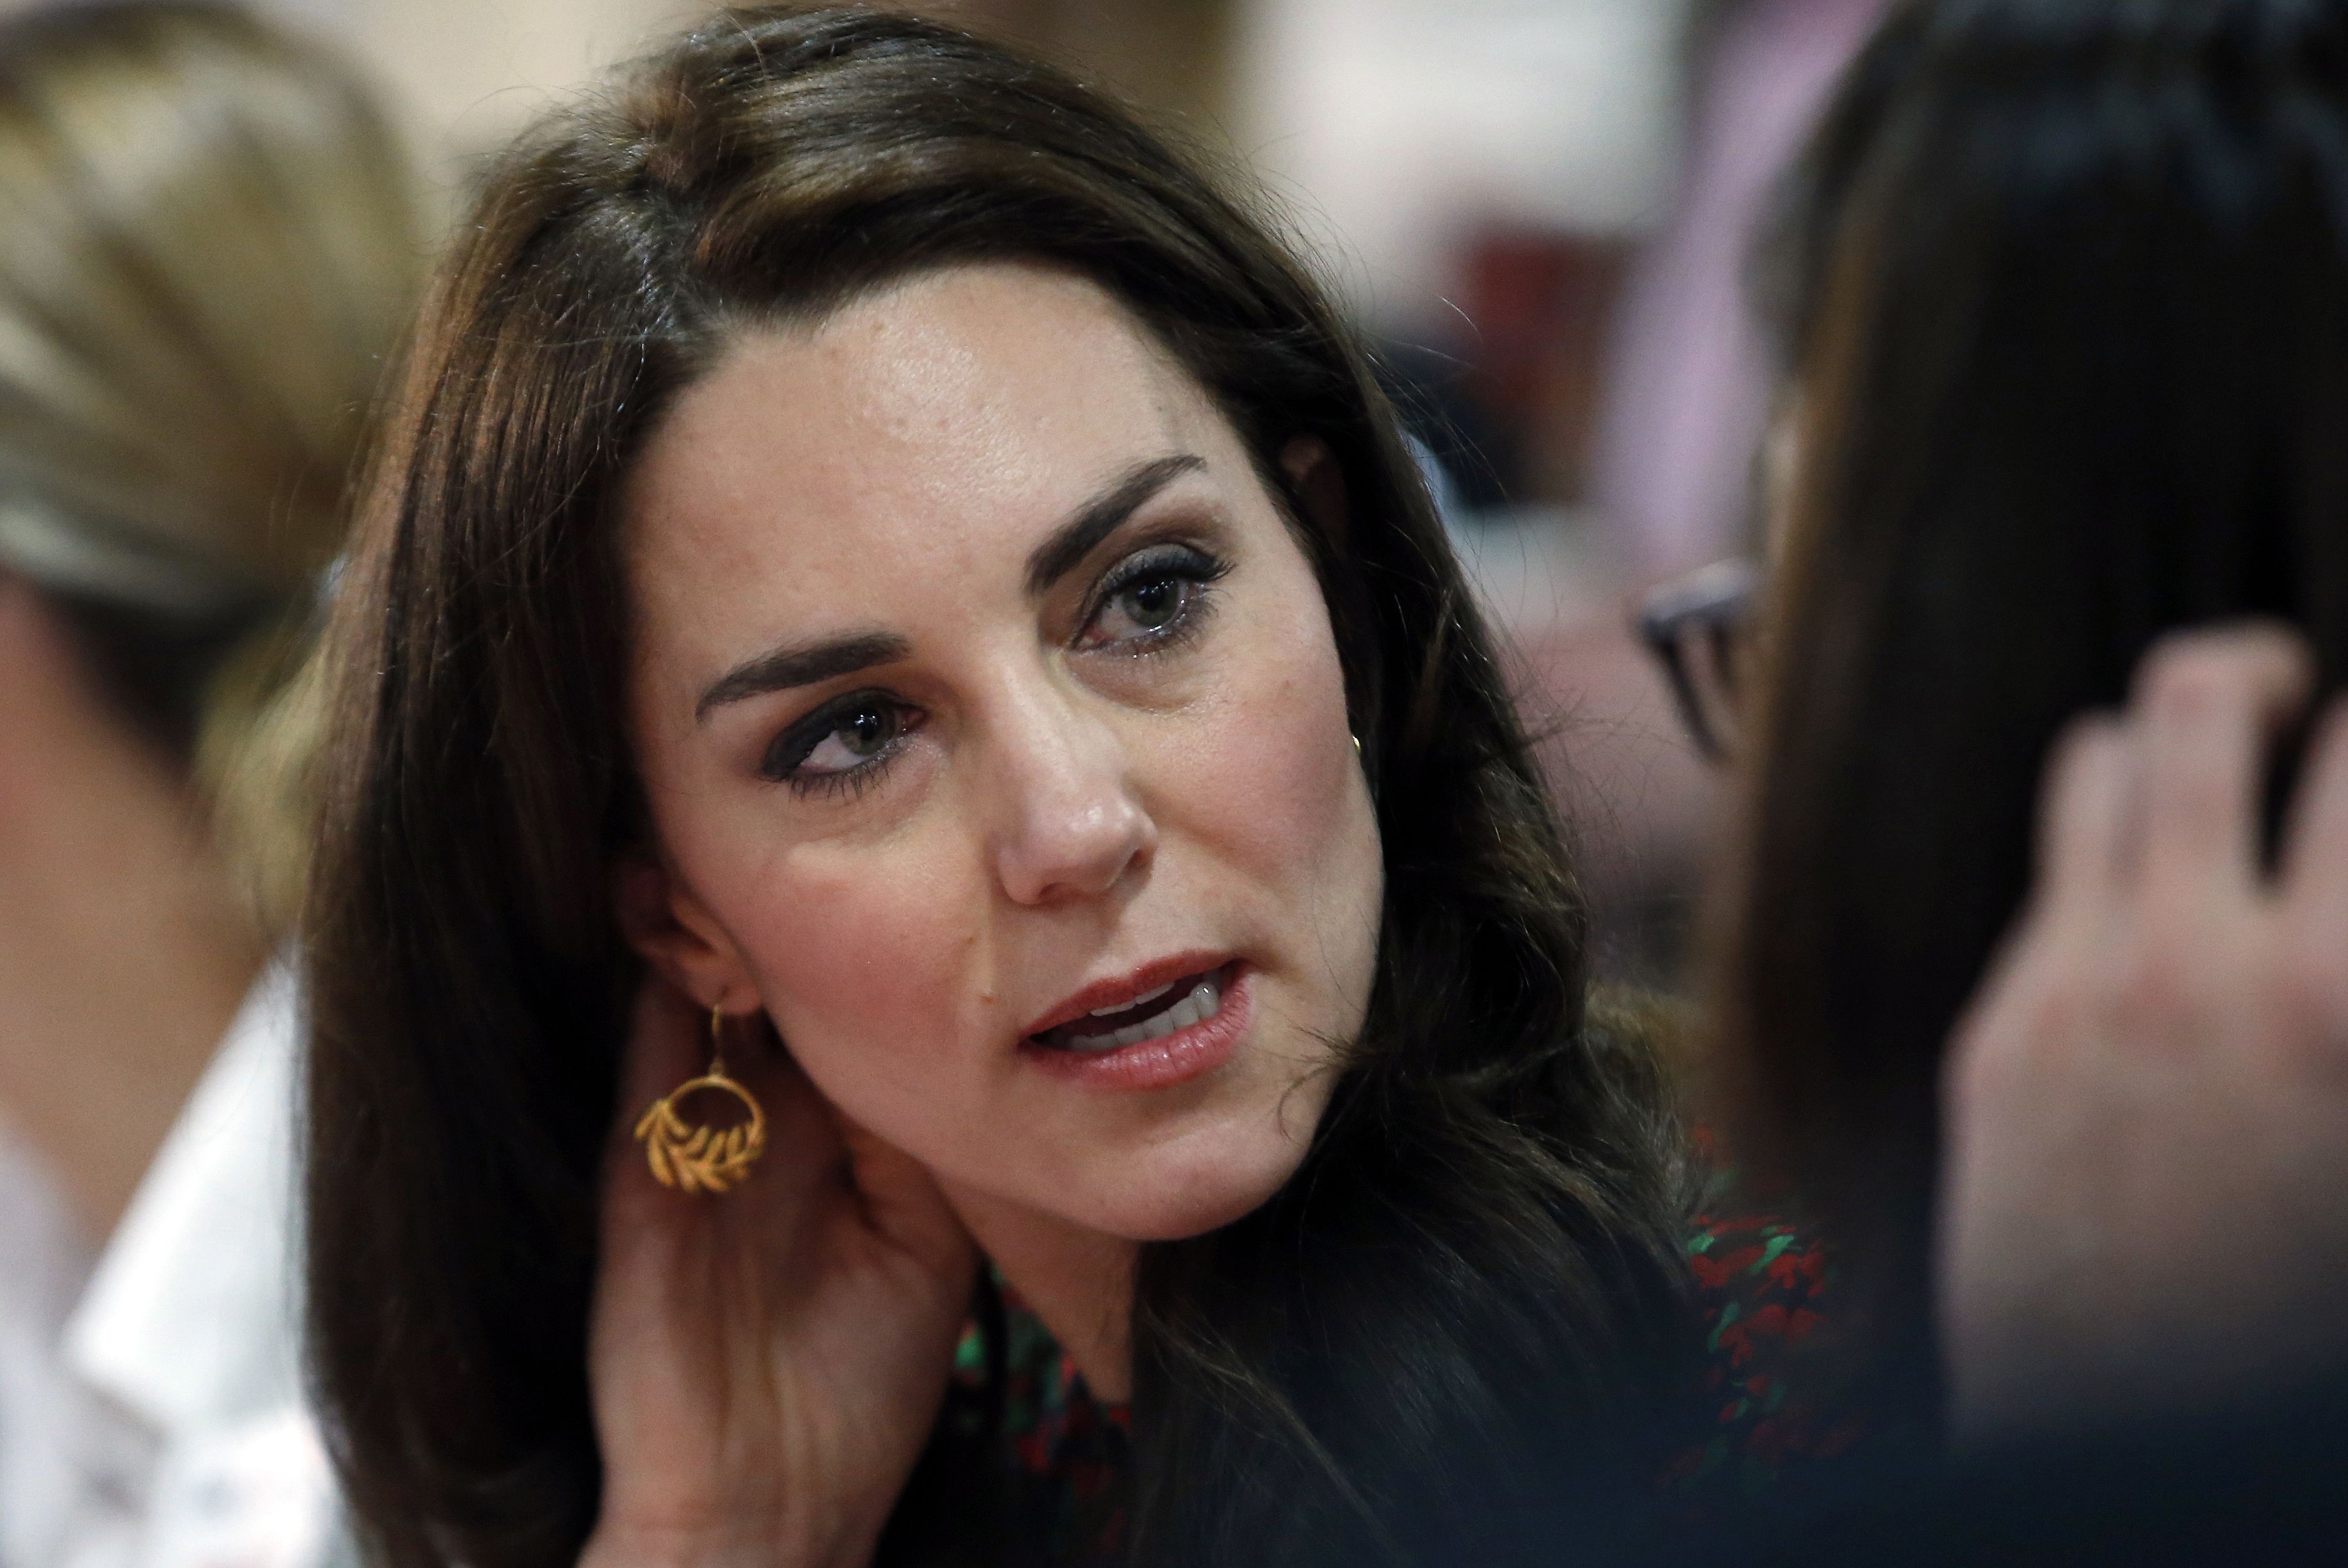 Kate Middleton at the AGM and Christmas party in London, England on December 19, 2016 | Source: Getty Images